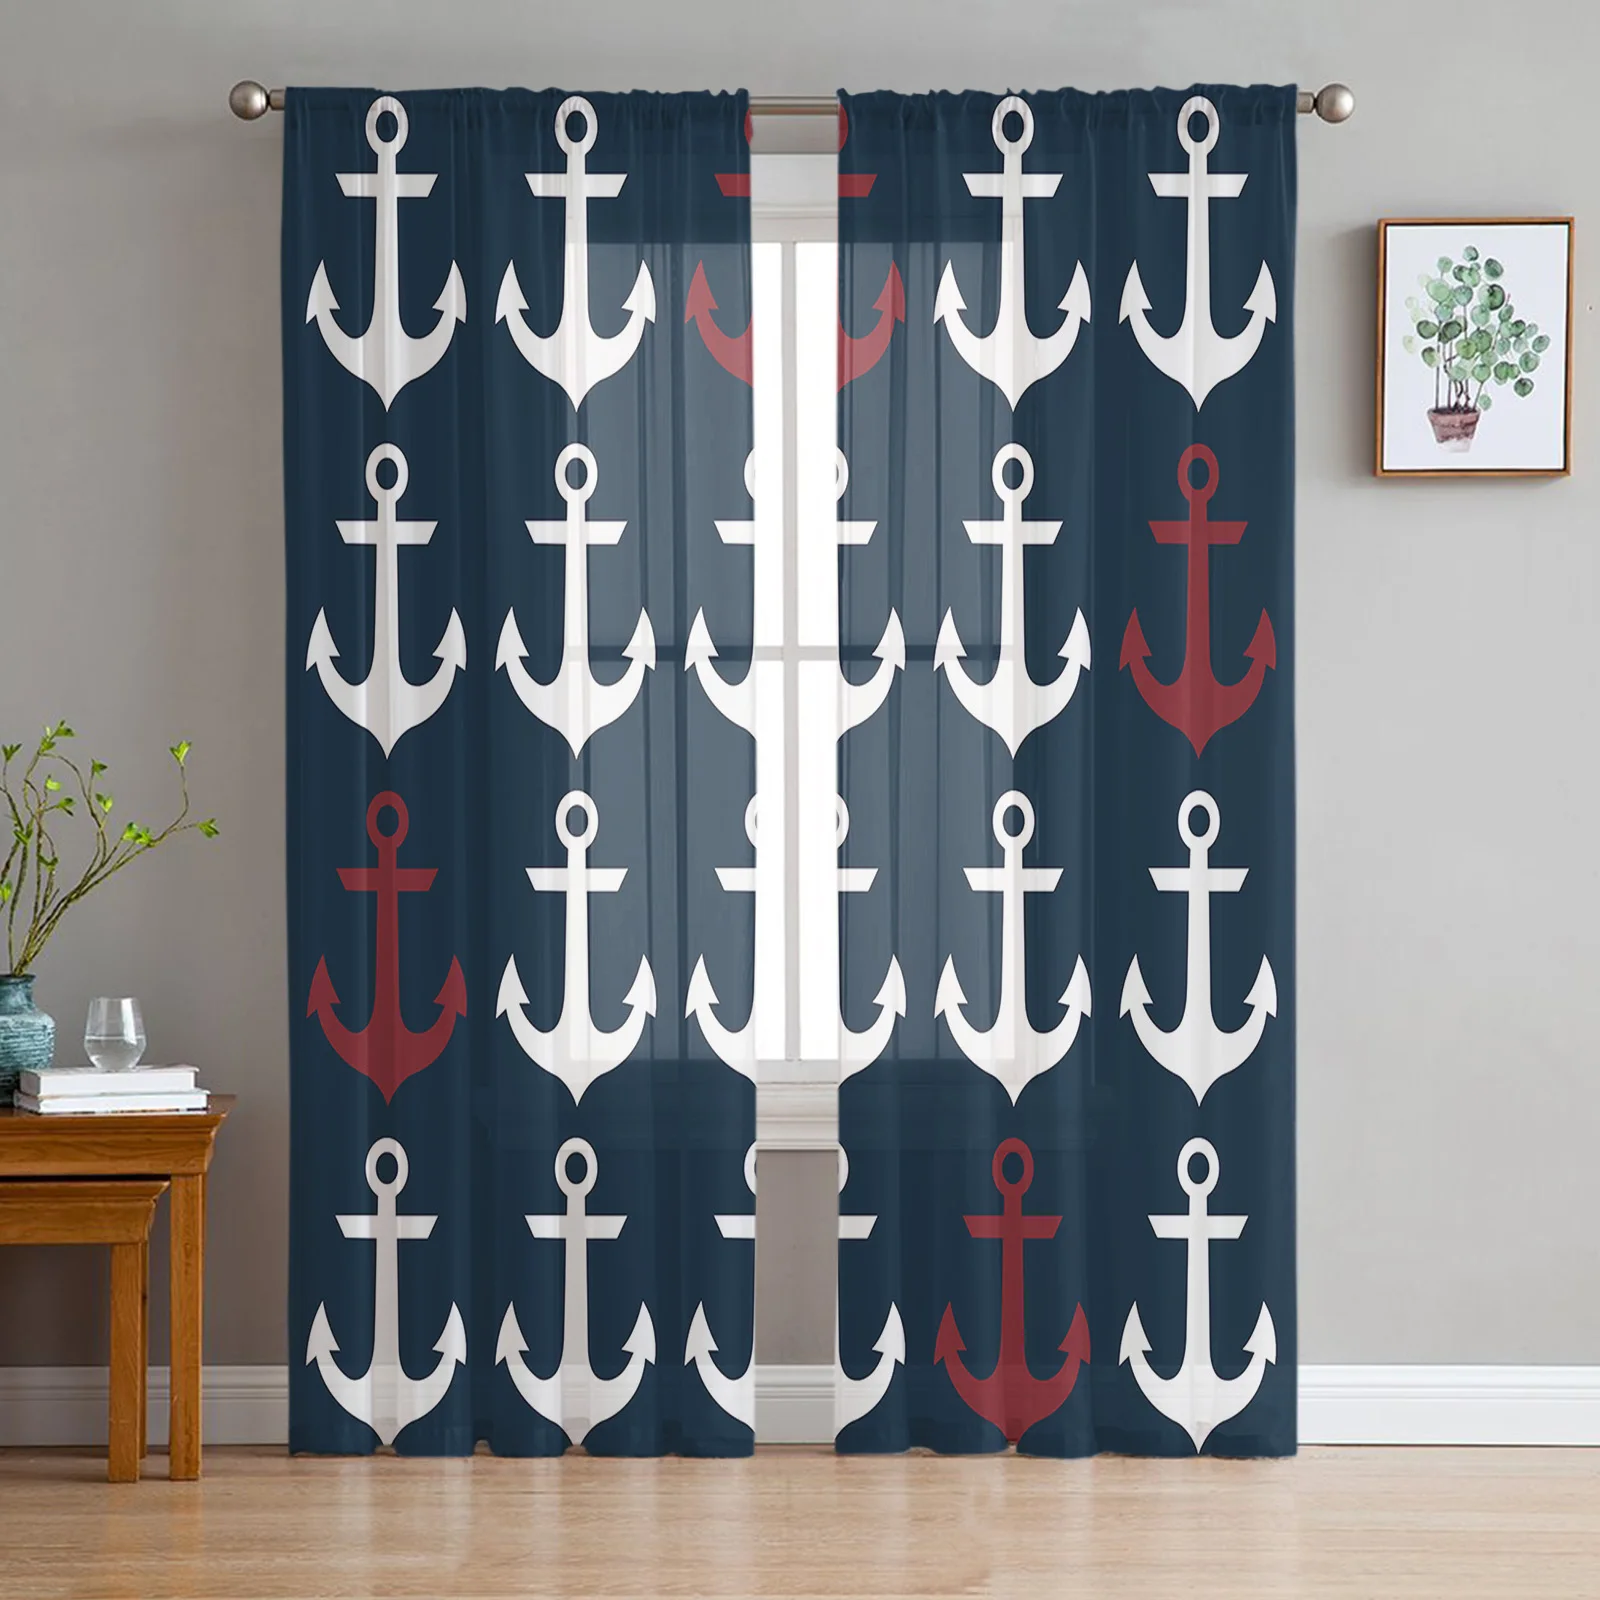 

Nautical Ocean Anchor Dark Blue Sheer Curtains for Living Room Decoration Window Curtain Kitchen Tulle Voile Organza Drapes